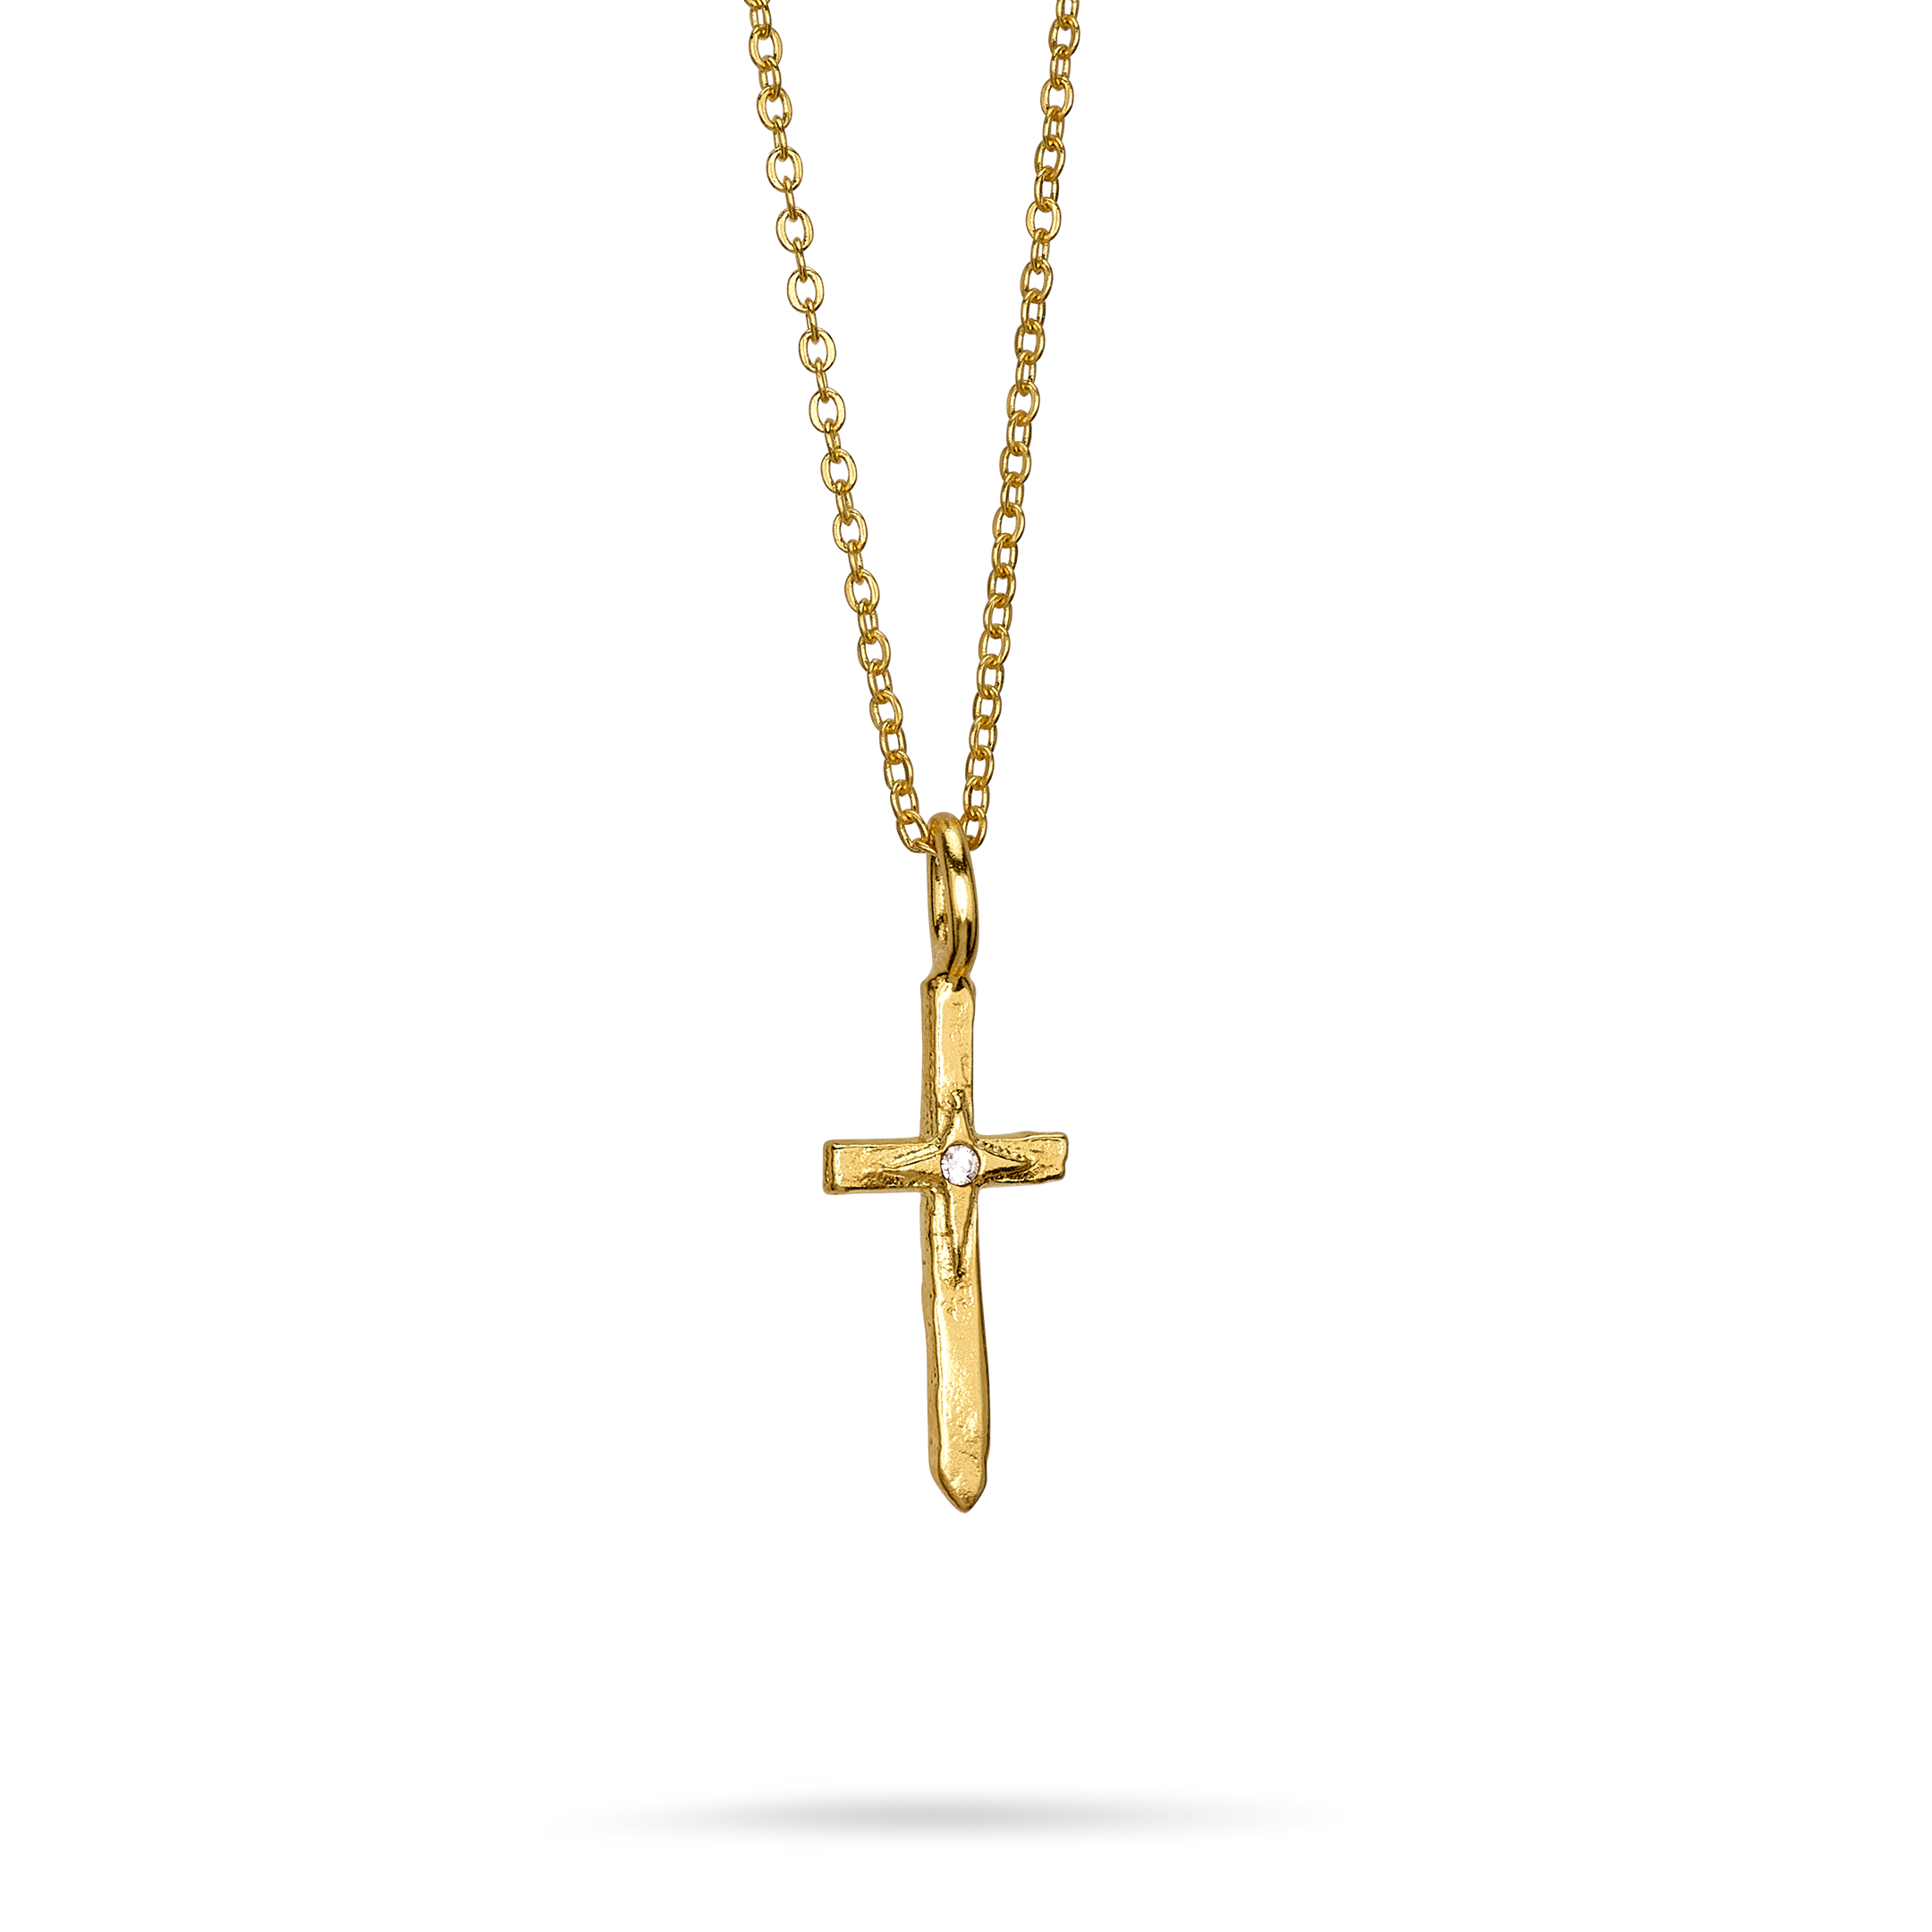 Peacemaker Cross Necklace Gold Plate